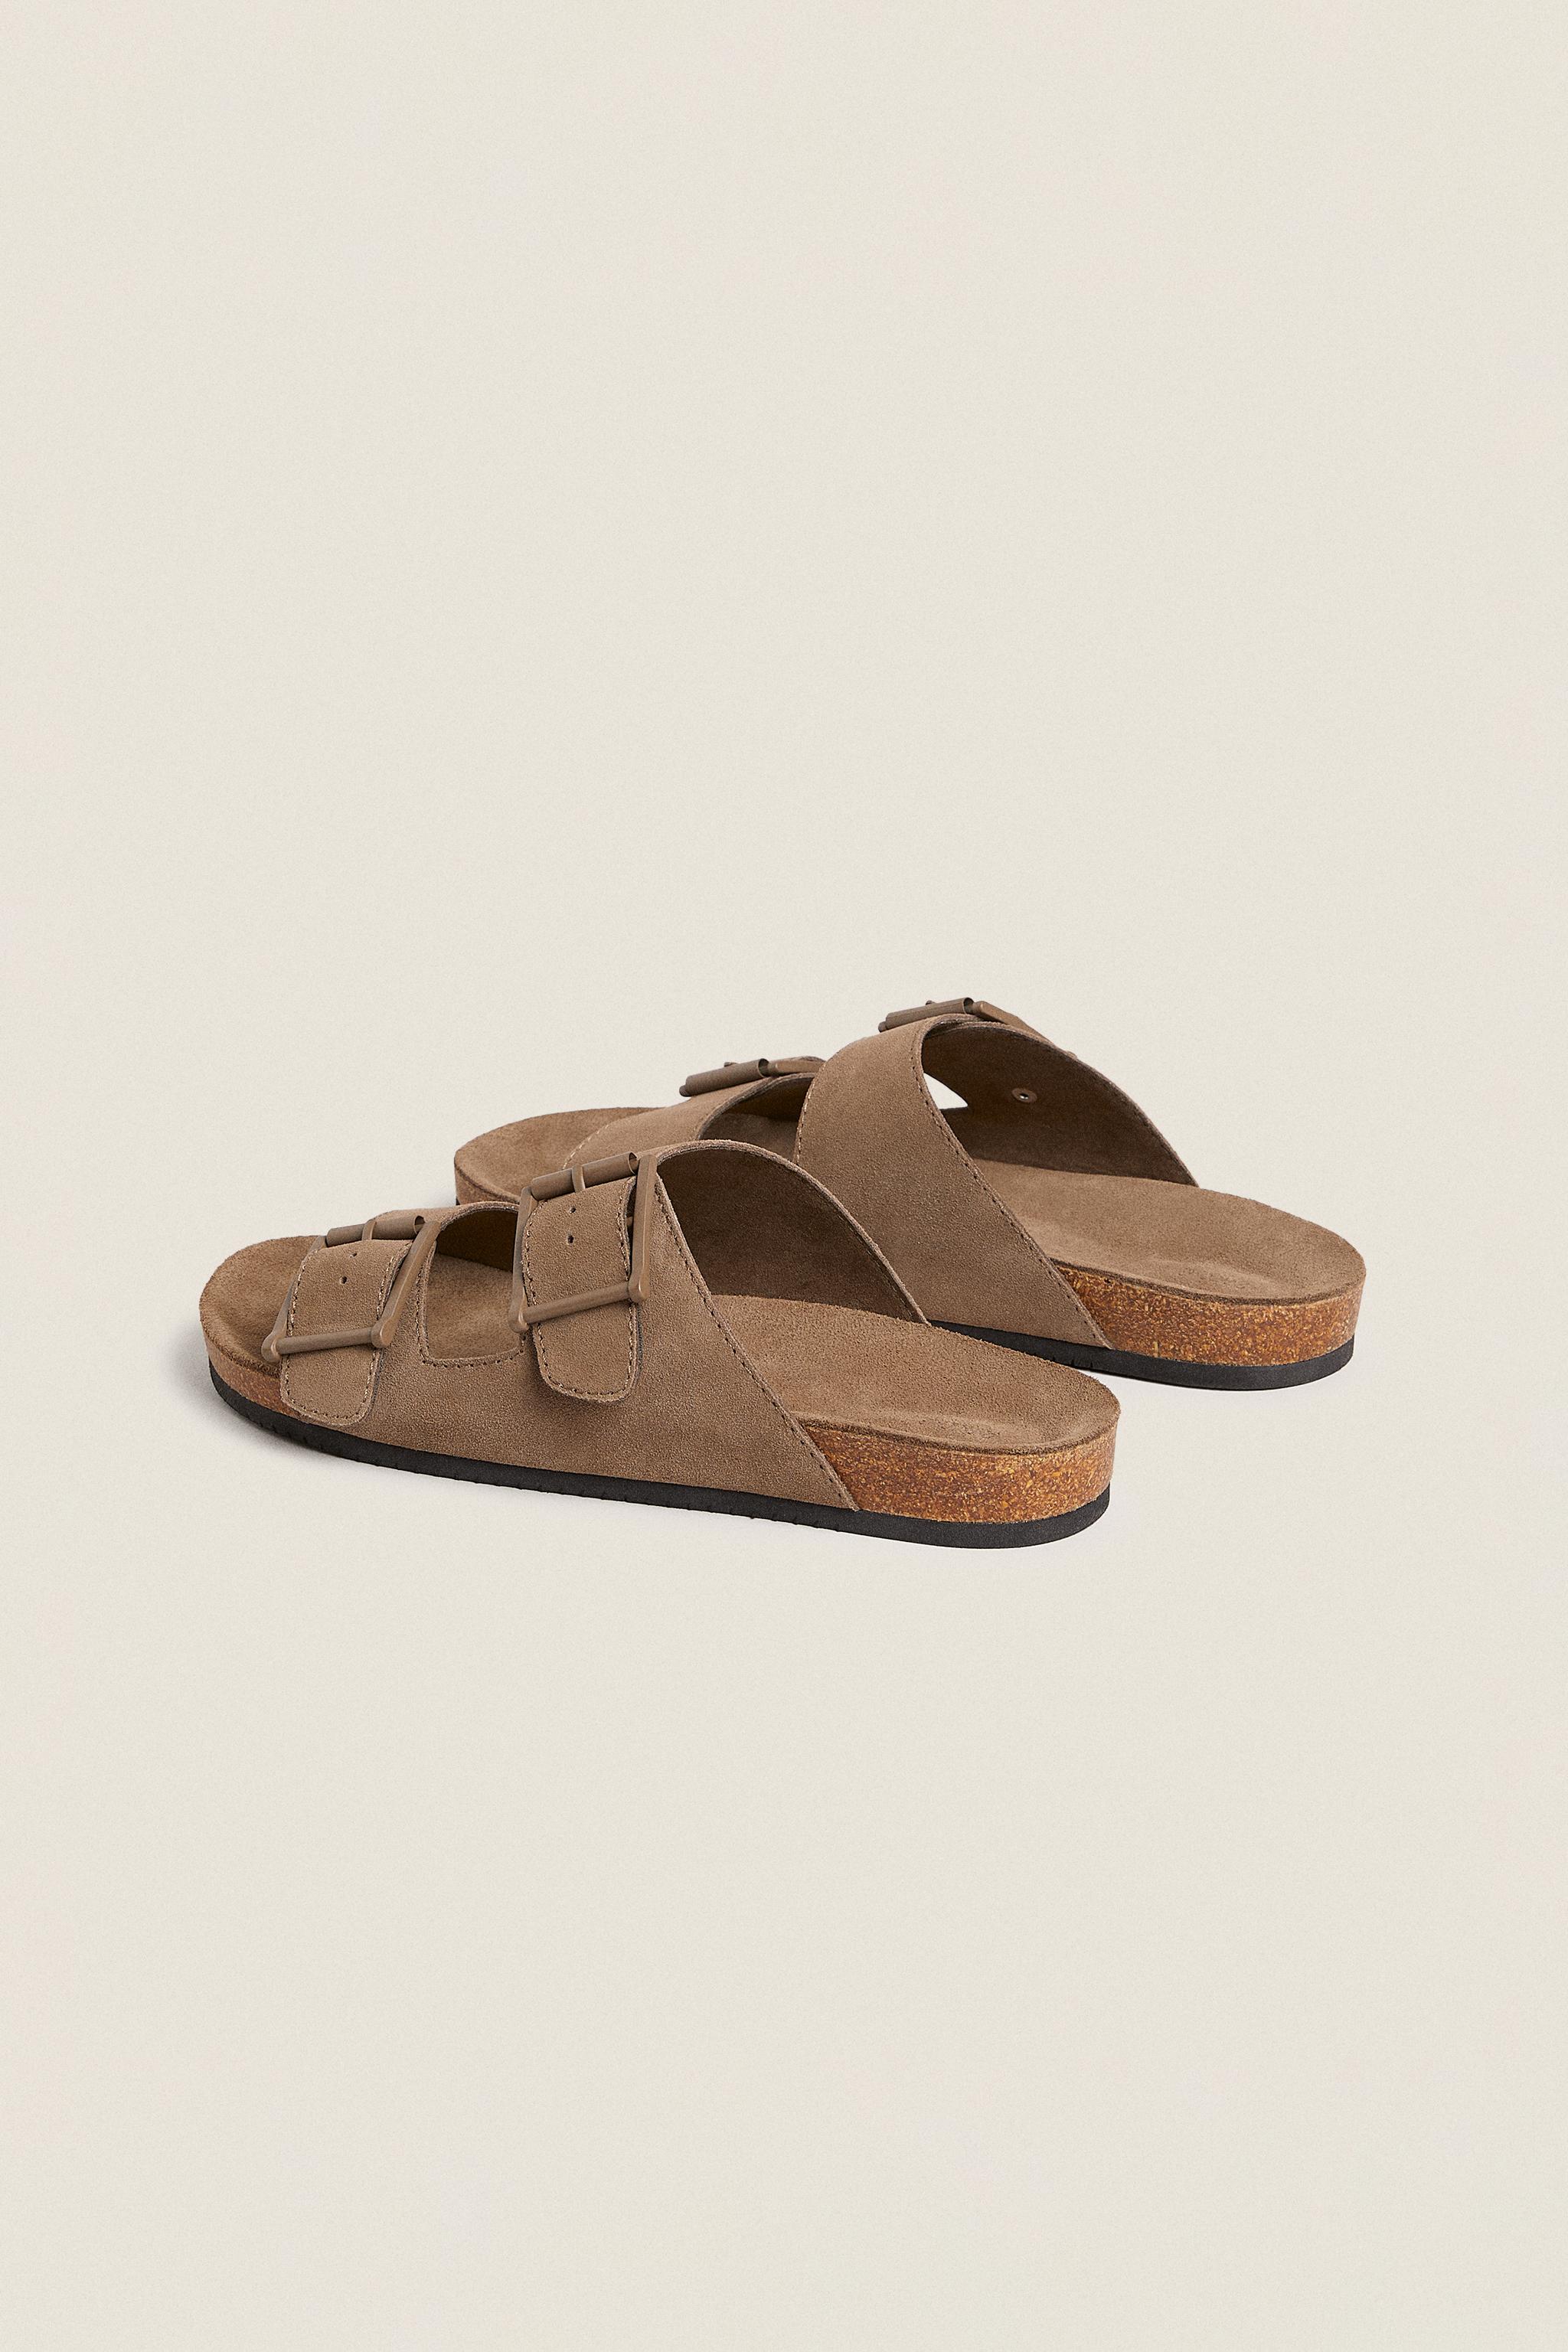 SPLIT LEATHER DOUBLE-STRAP SANDALS - Taupe Gray | ZARA United States